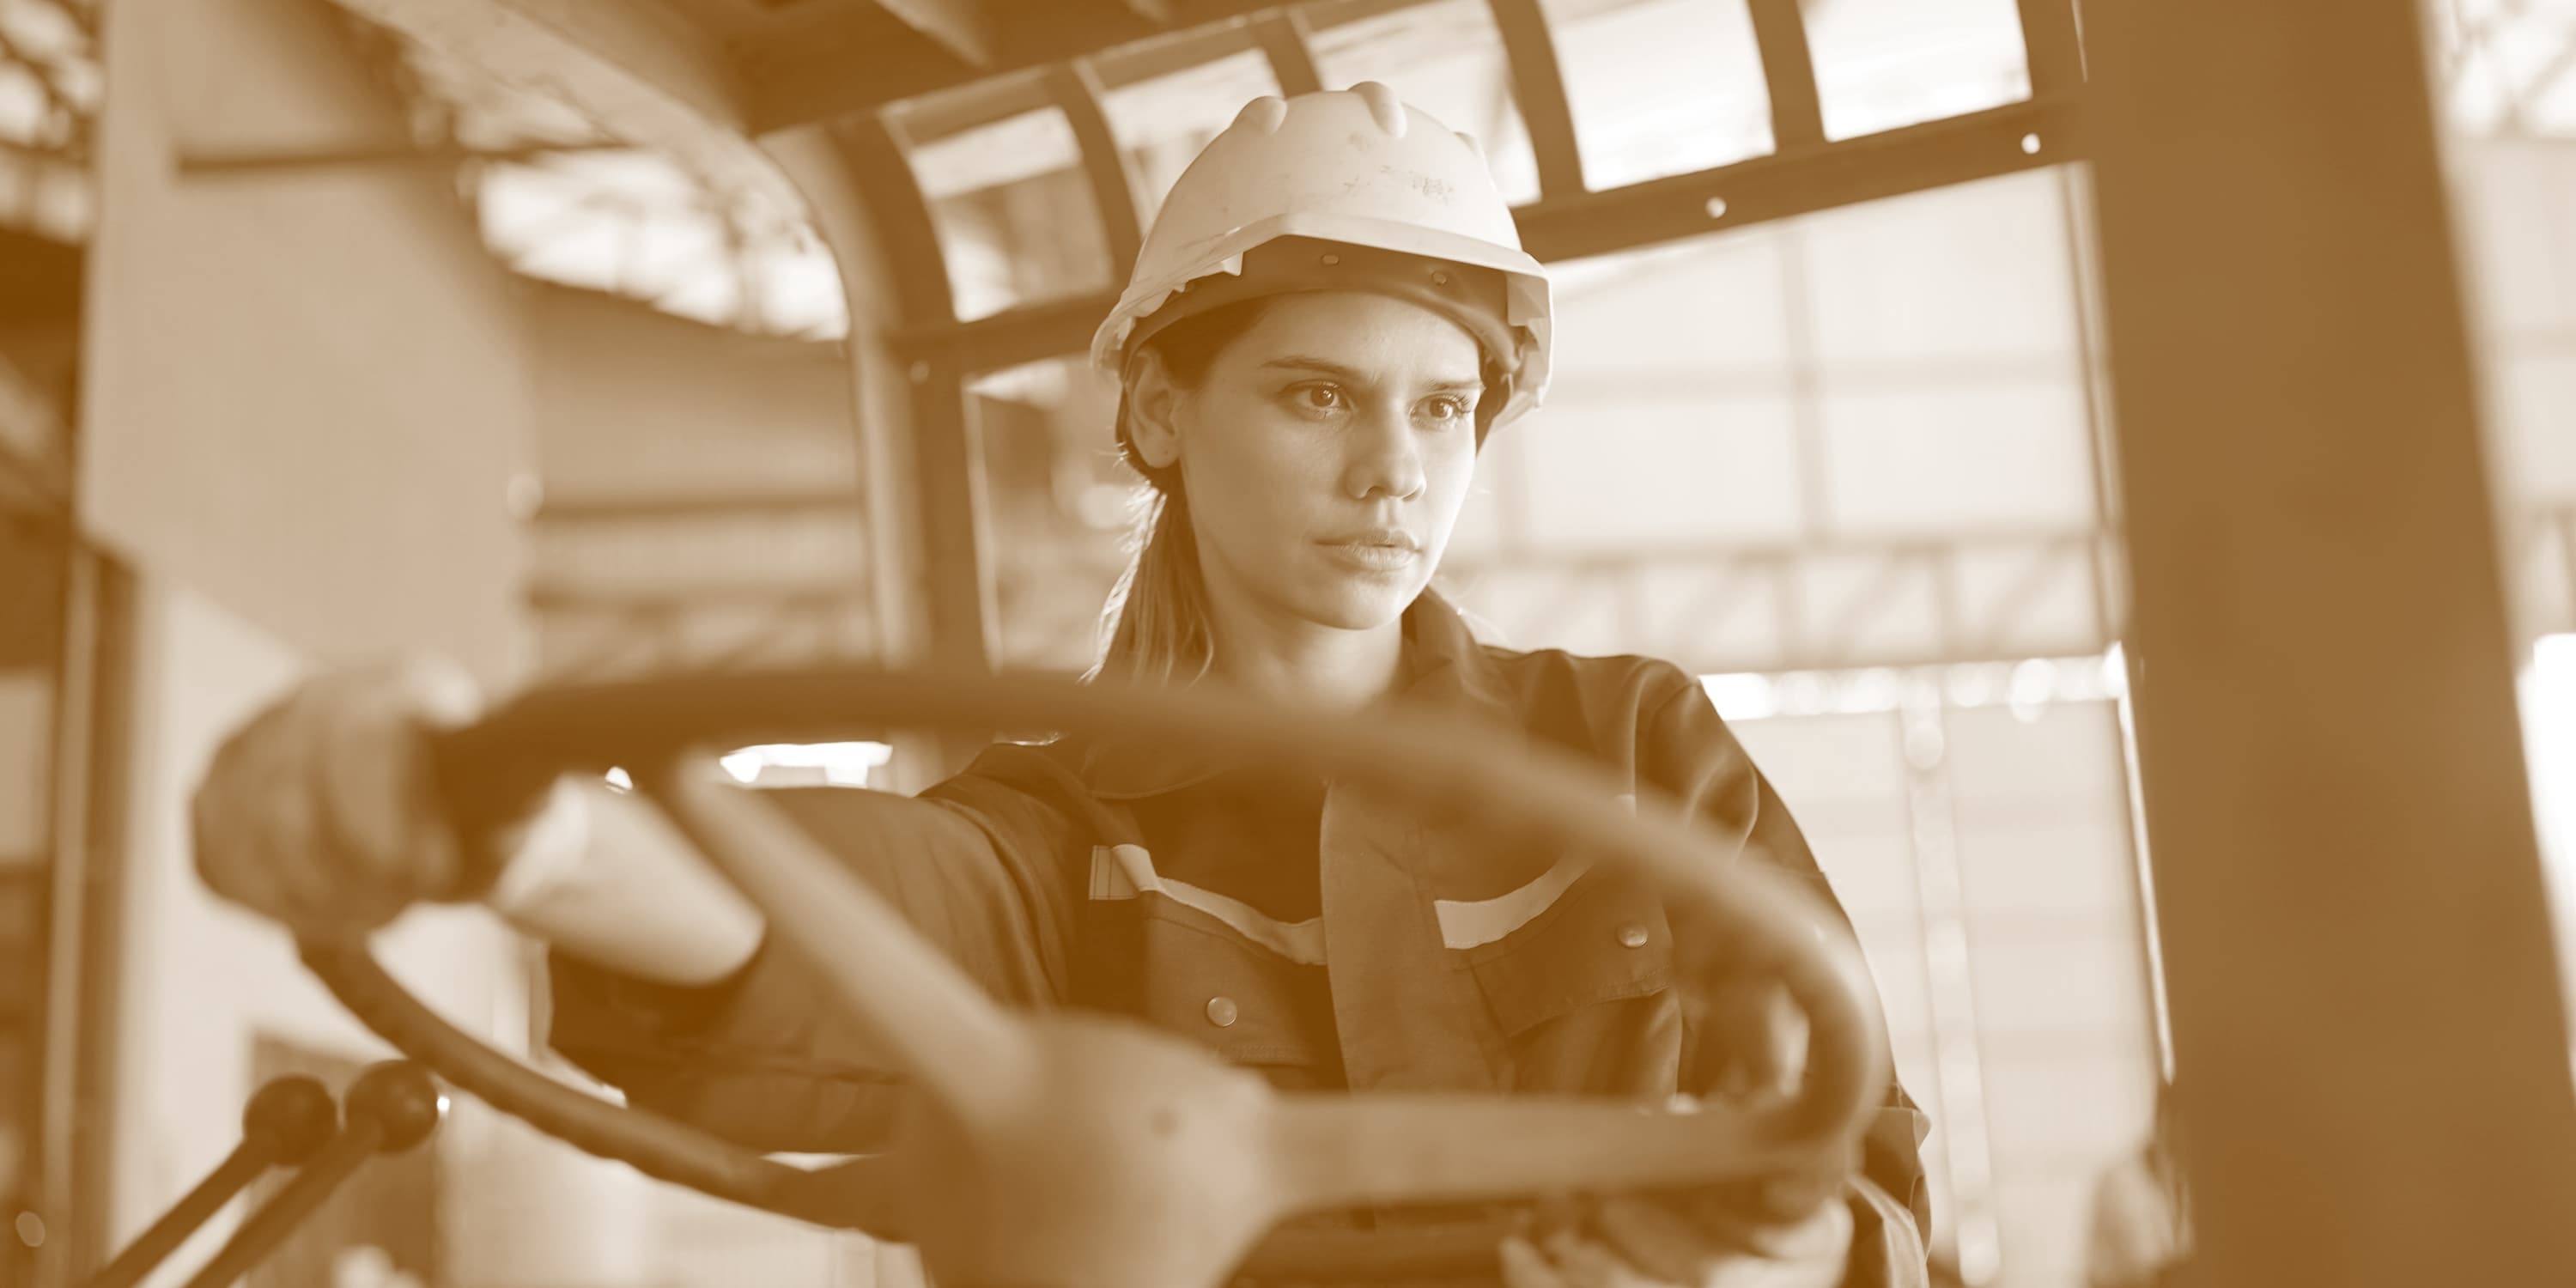 The construction sector can create a more inclusive and supportive environment for women.